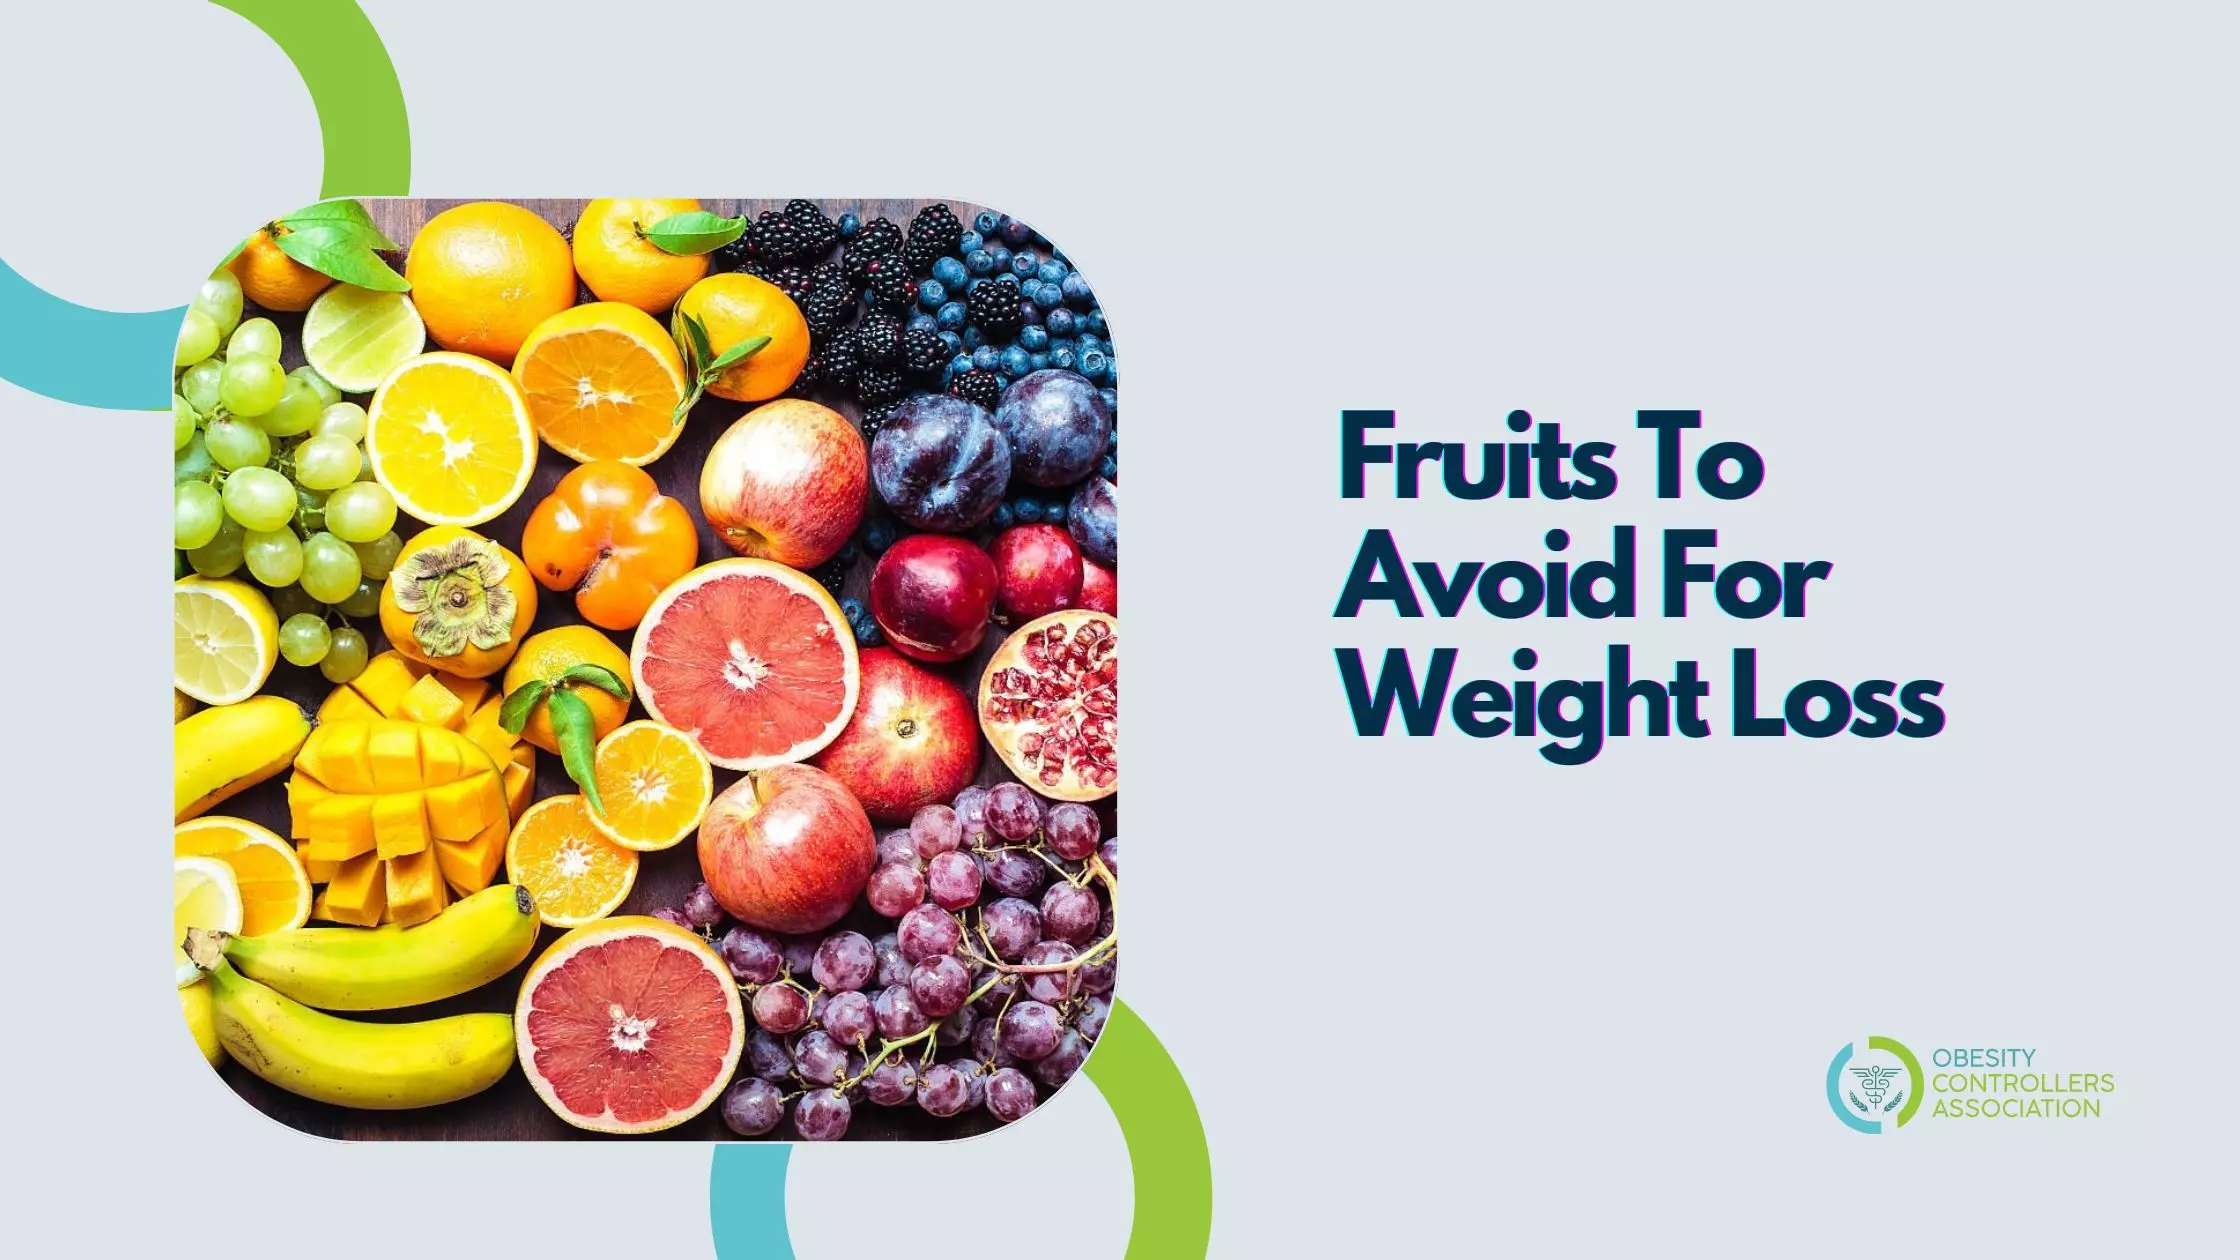 Fruits To Avoid For Weight Loss